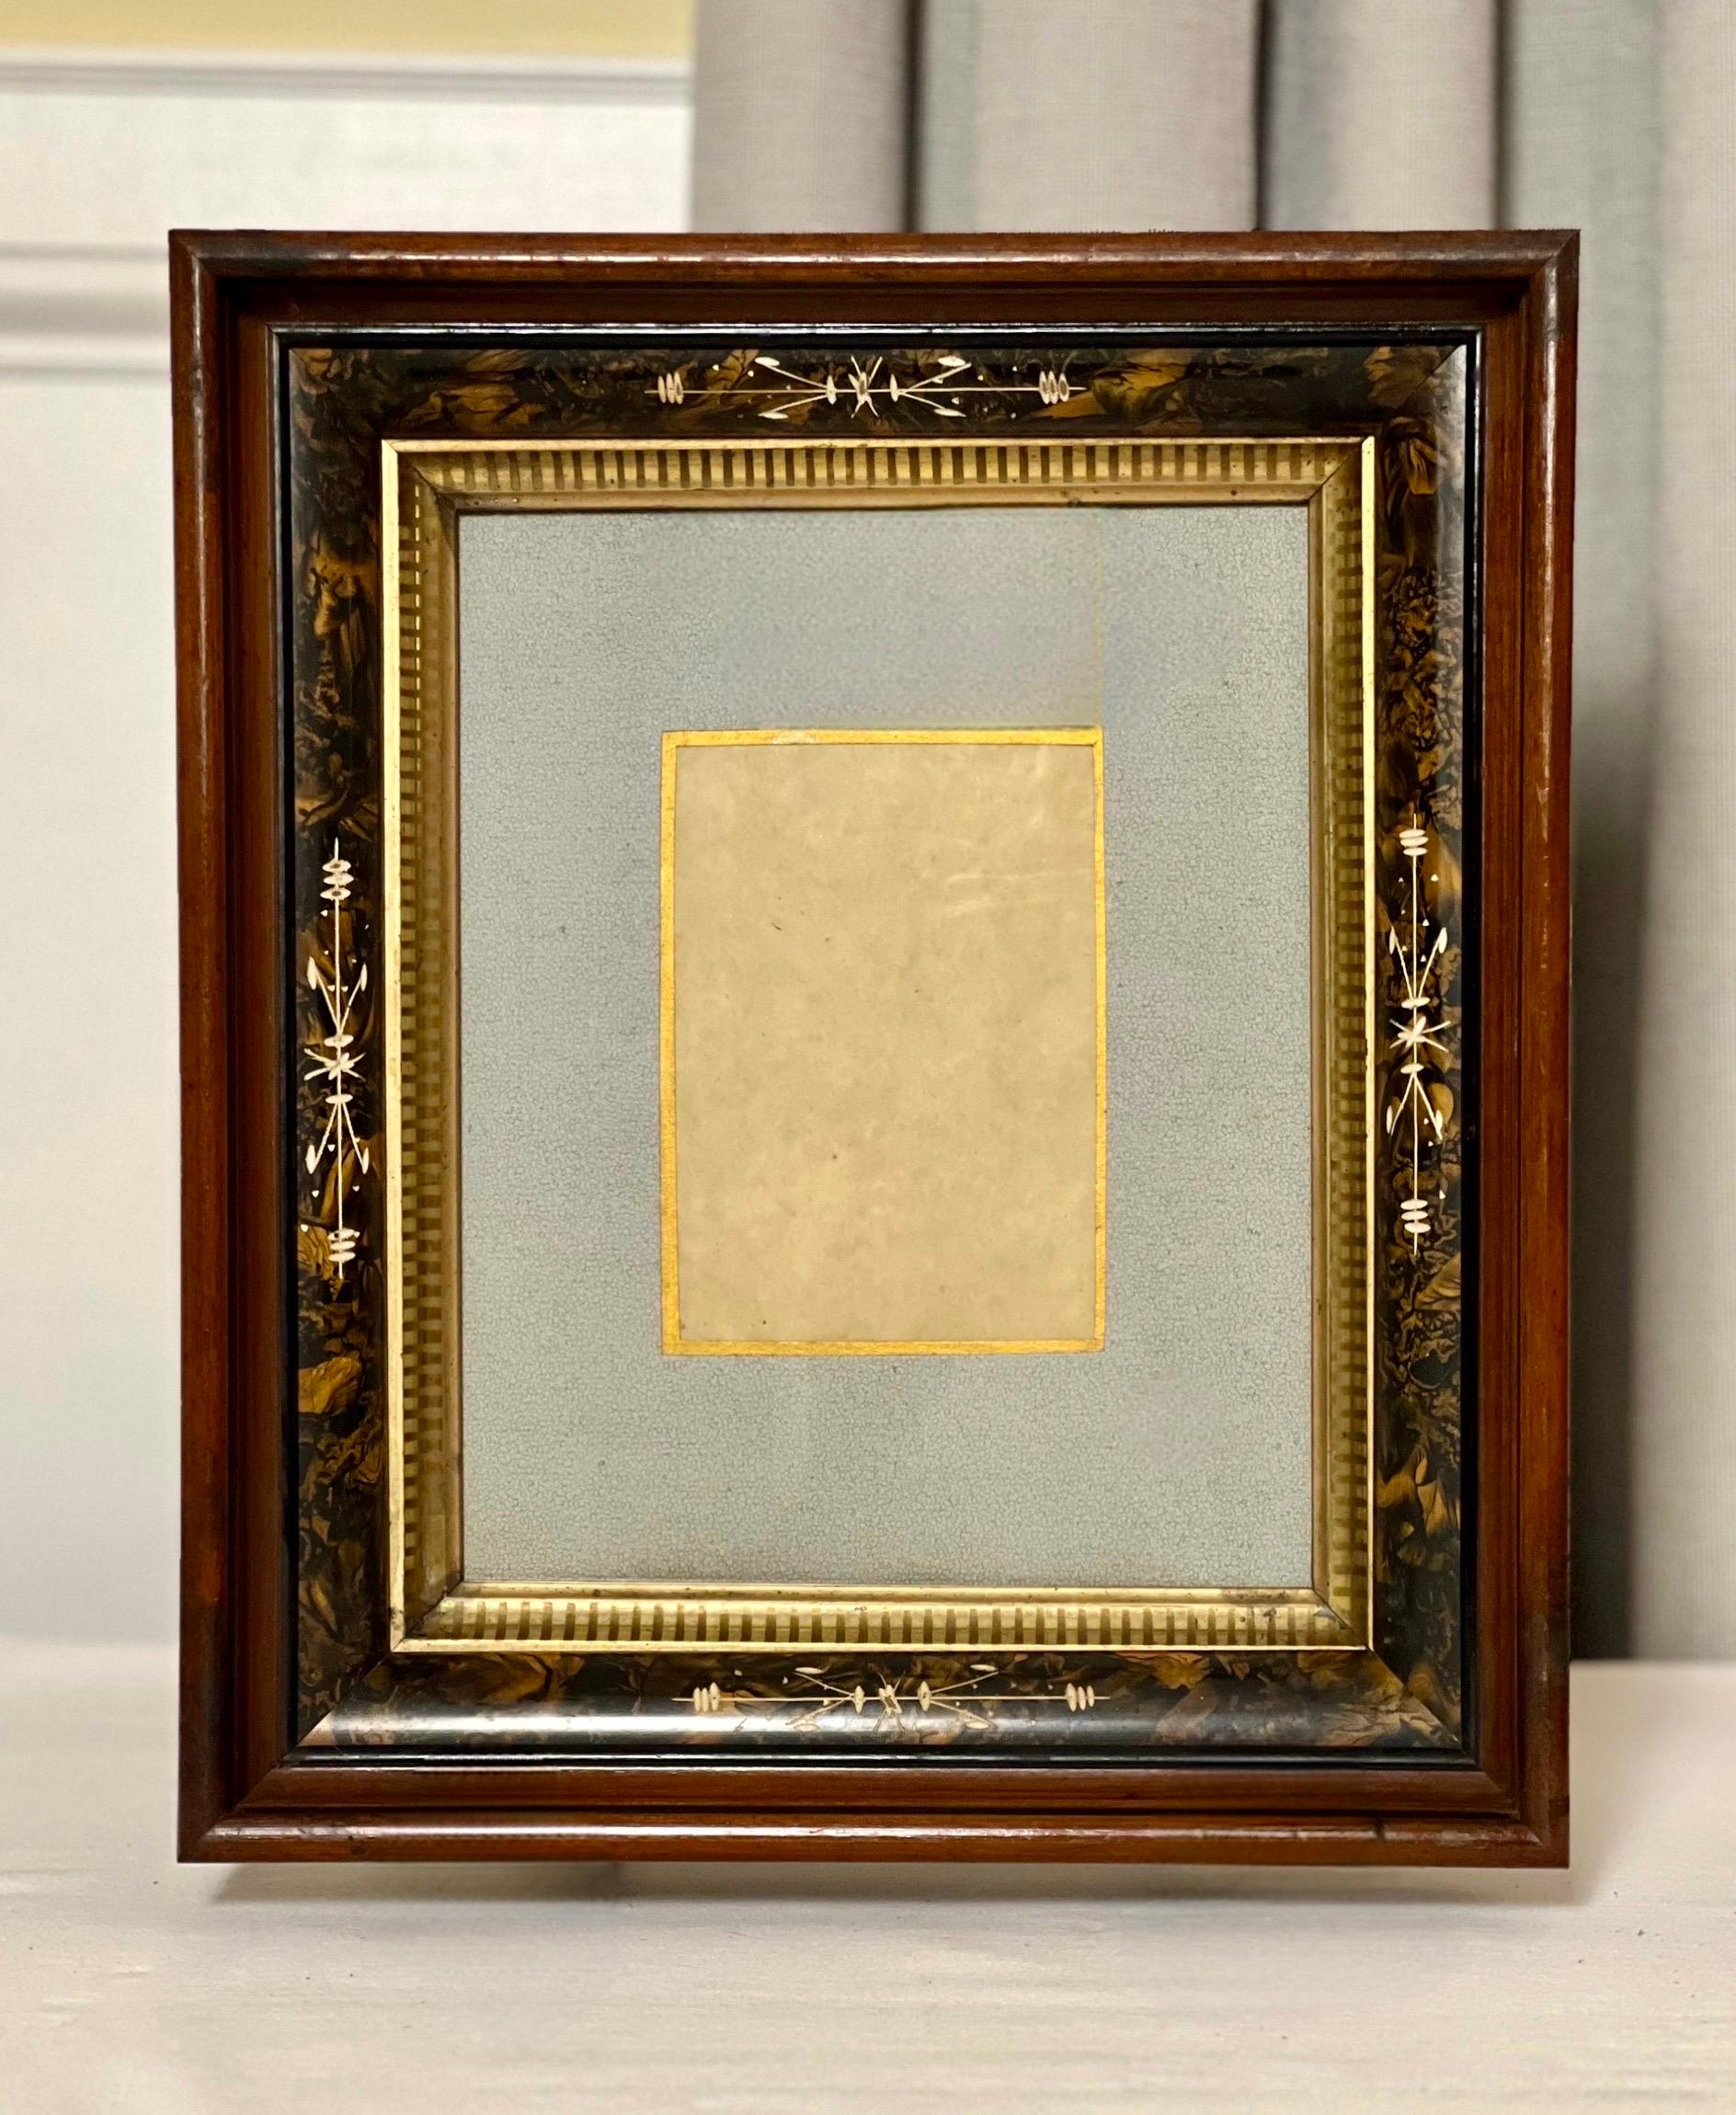 Victorian deep well walnut and etched plaster frame matted under glass, late 19th-early 20th century.

Elegant handcrafted wood frame layered with an ebonized band, a decorated, etched plaster inner frame with carved gilt wood trim and original soft